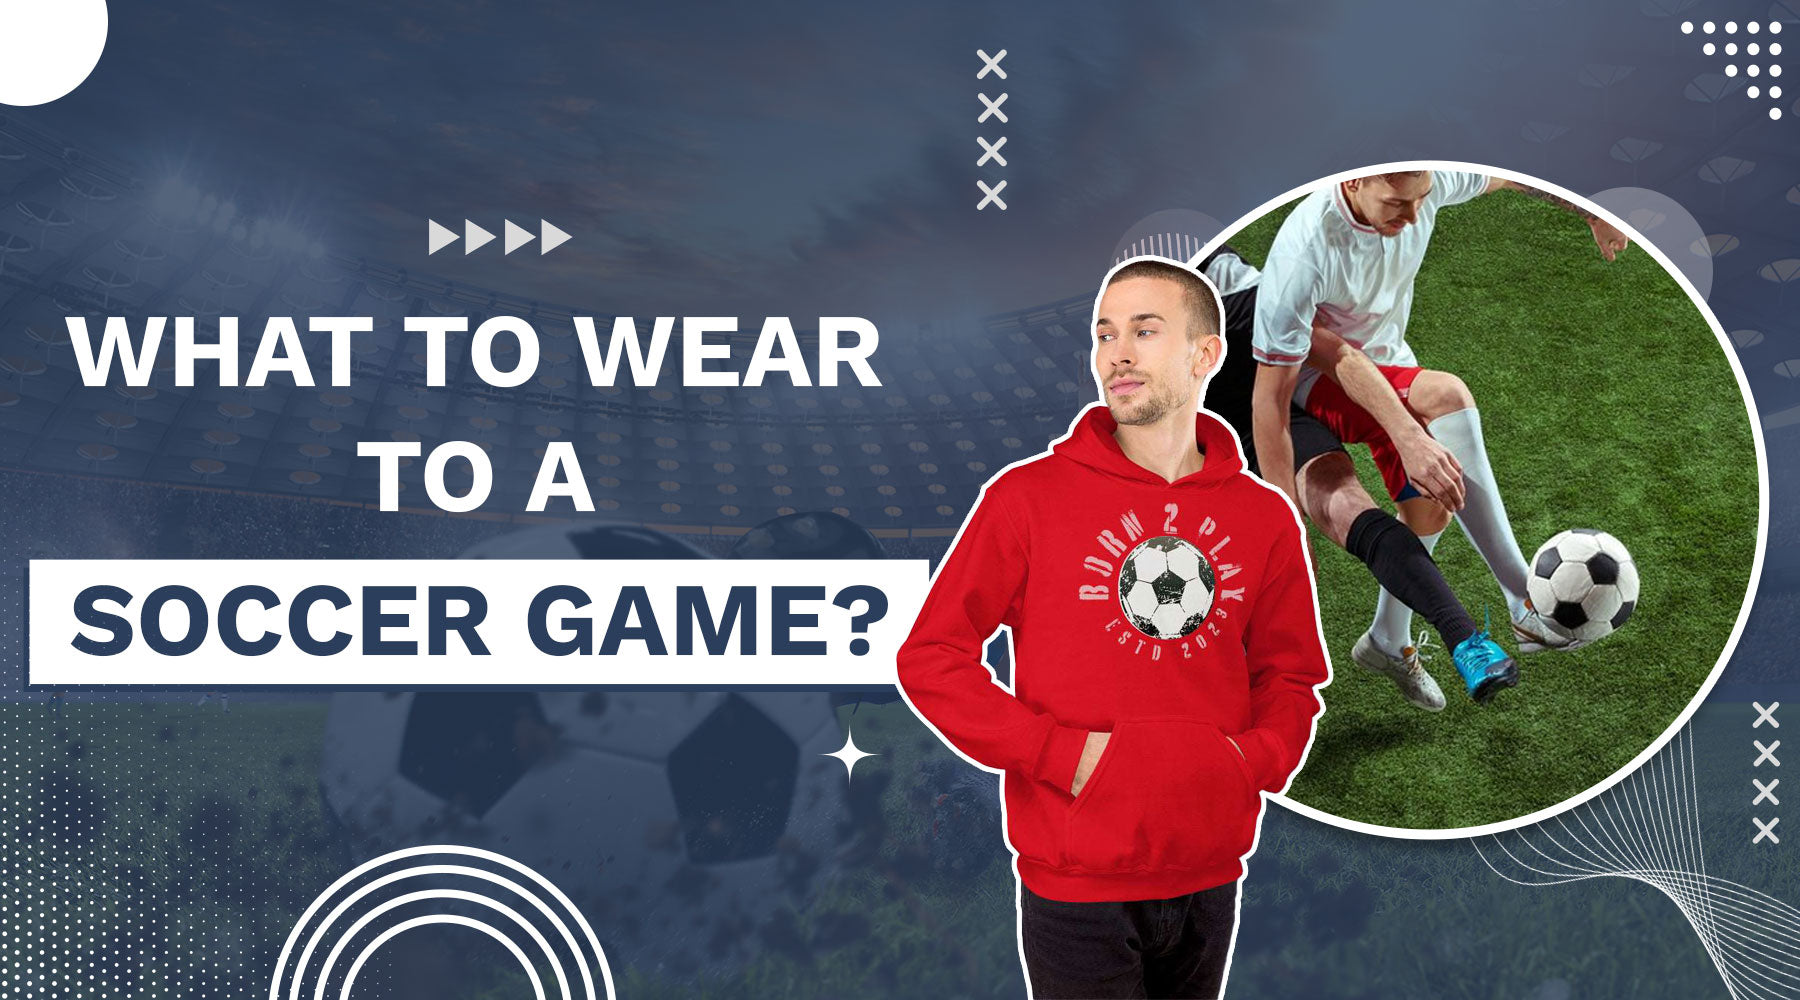 What to Wear to a Soccer Game?